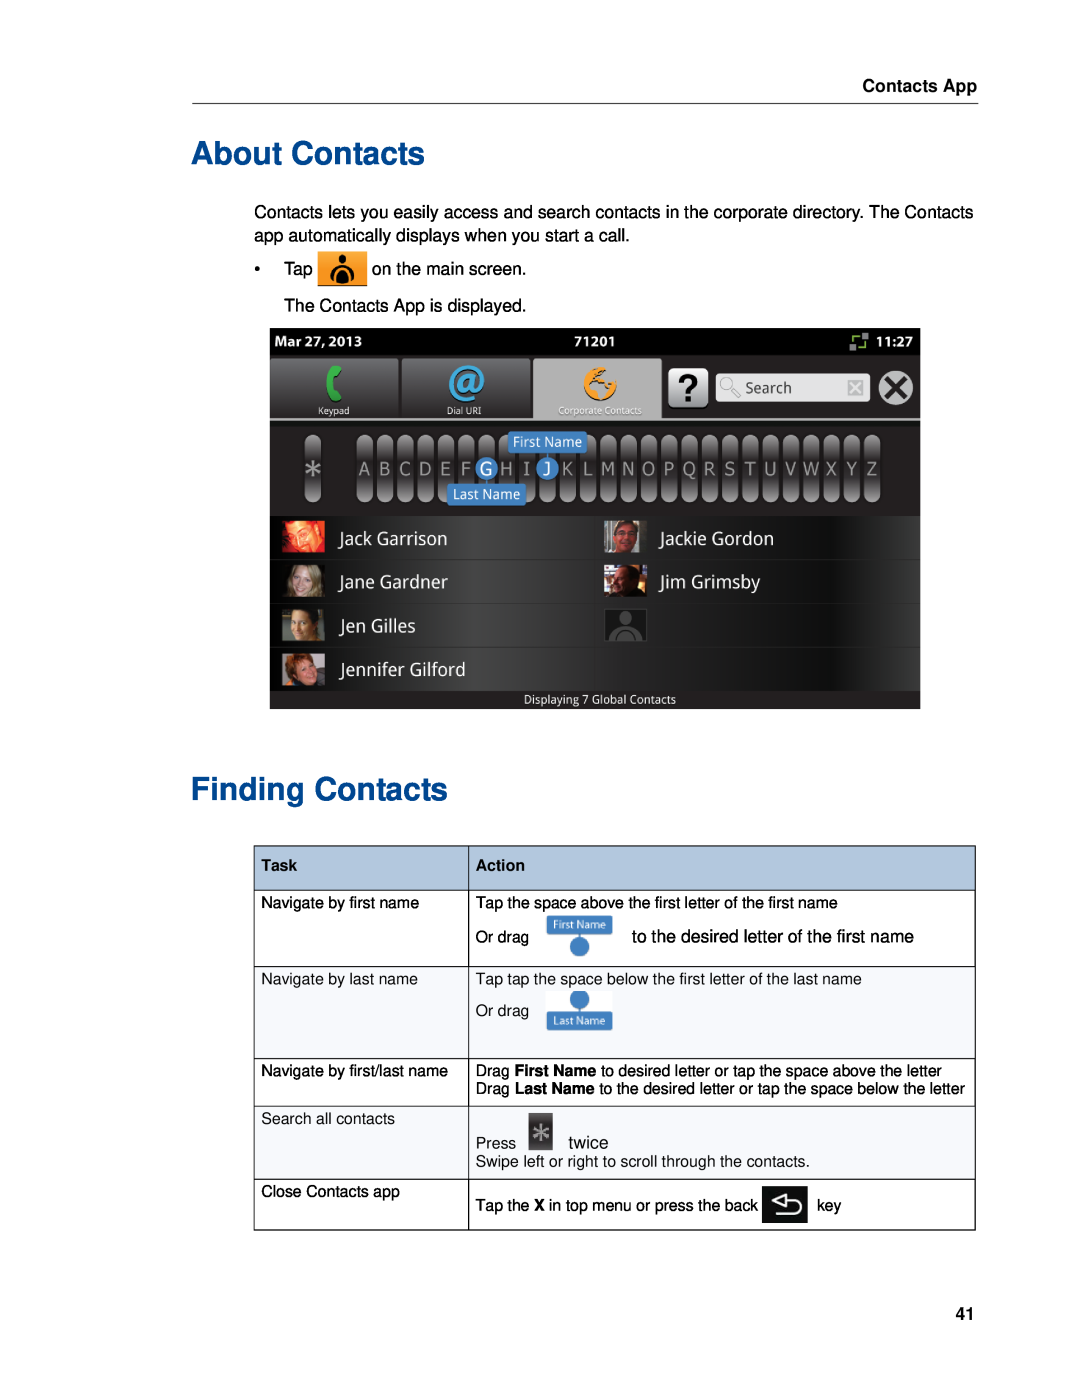 Mitel UC360 manual About Contacts, Finding Contacts, Contacts App 